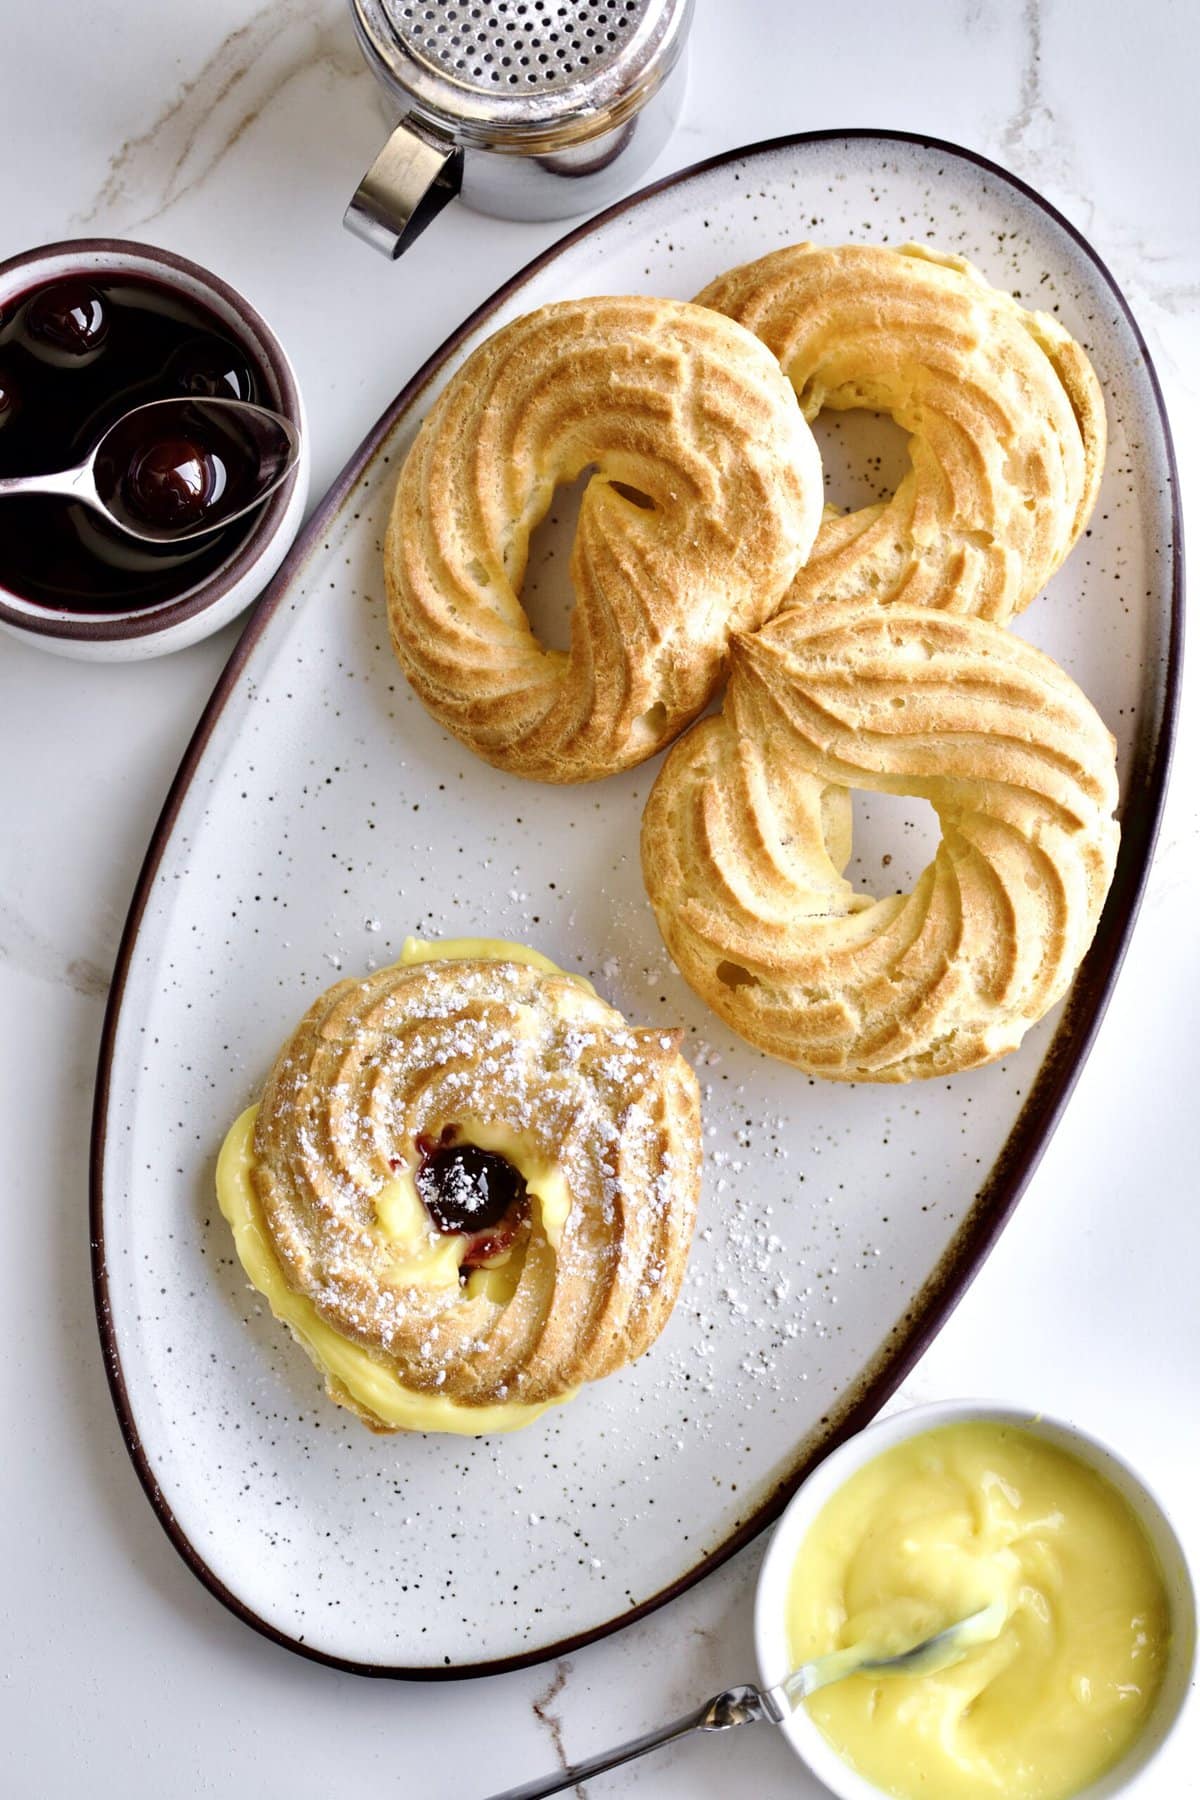 Process of making Baked Zeppole Di San Giuseppe Recipe (Italian)- baked zeppole filled with pastry cream add other half of pastry back to top and add amarena cherries on top.